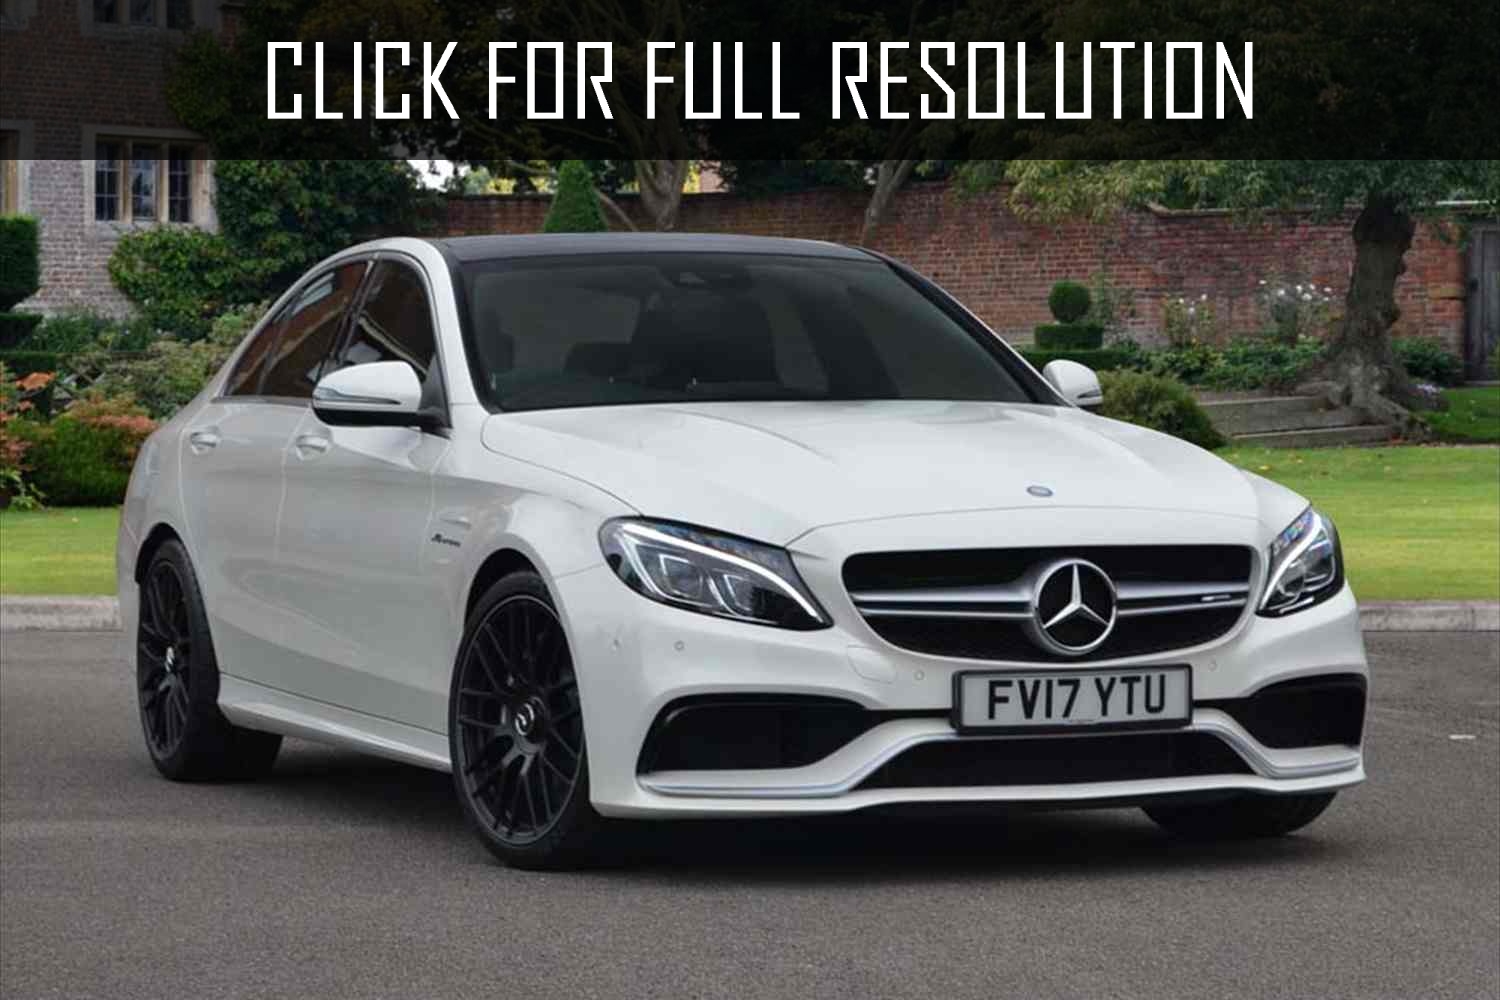 Mercedes Benz C Class White amazing photo gallery, some information